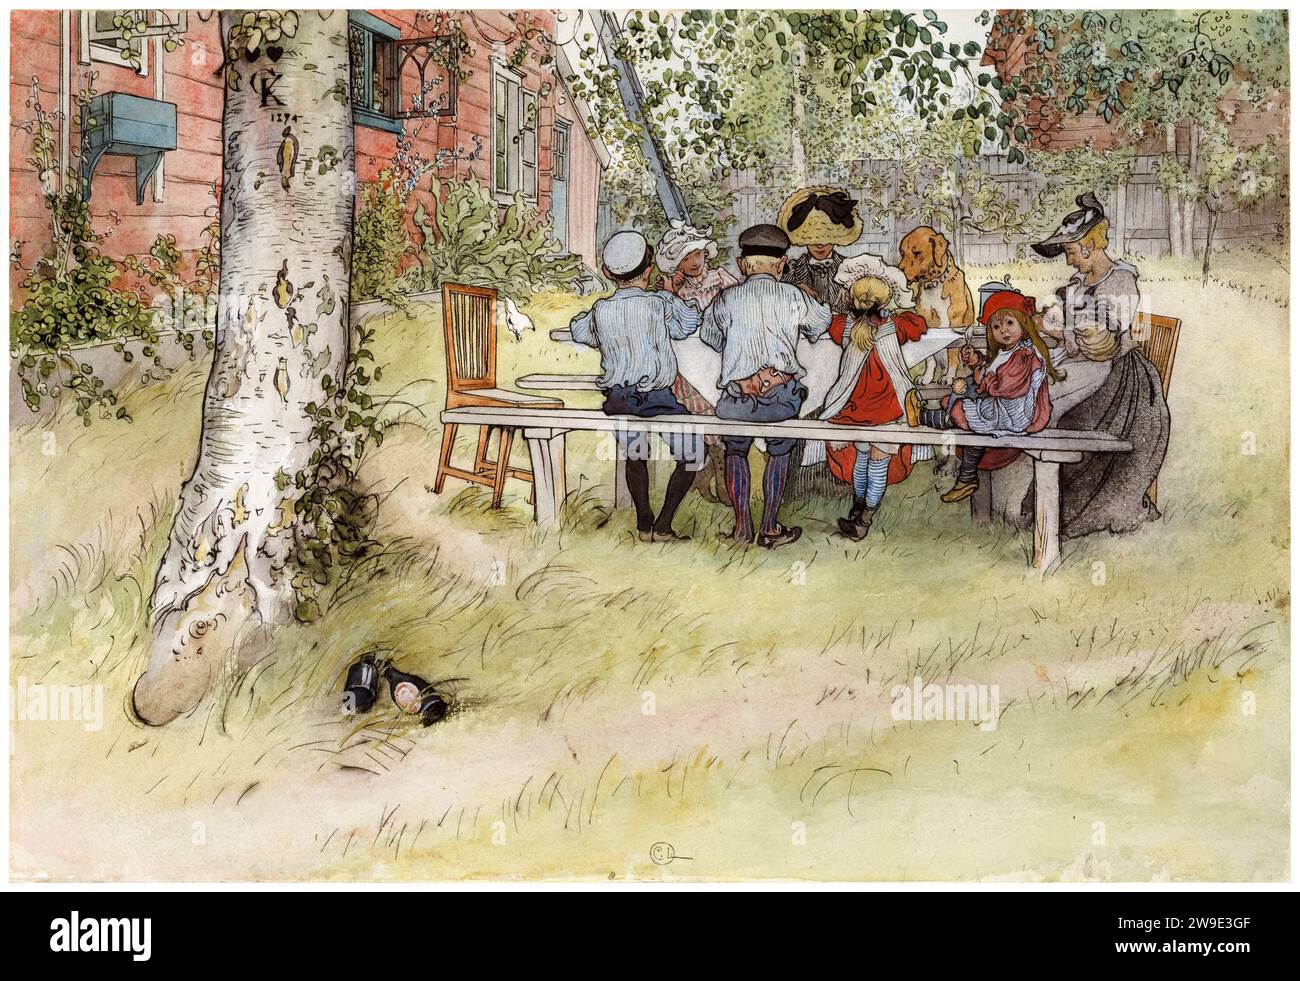 Carl Larsson, Breakfast under the Big Birch, From the series: 'A Home' (26 watercolours), watercolour painting, 1894-1895 Stock Photo